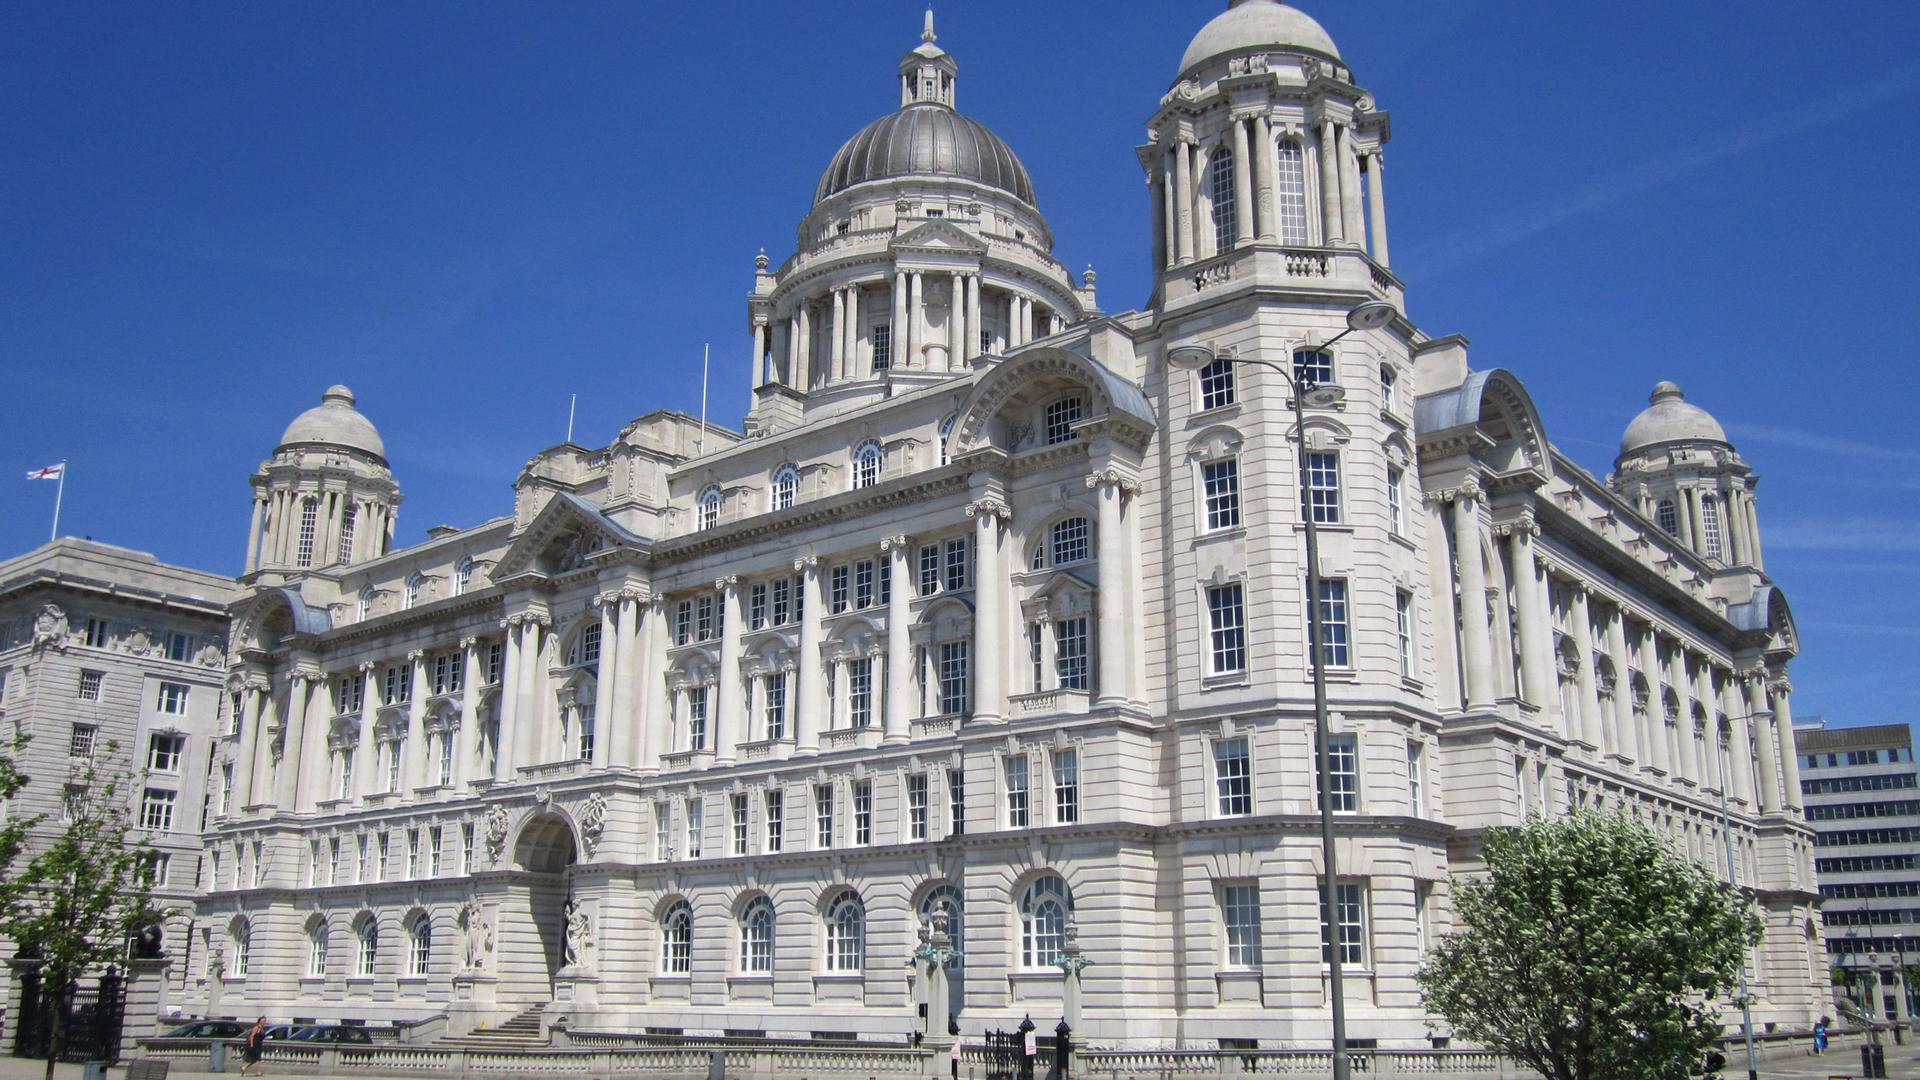 The large white stone facade of the Port of Liverpool building is shown with a silver dome on top.